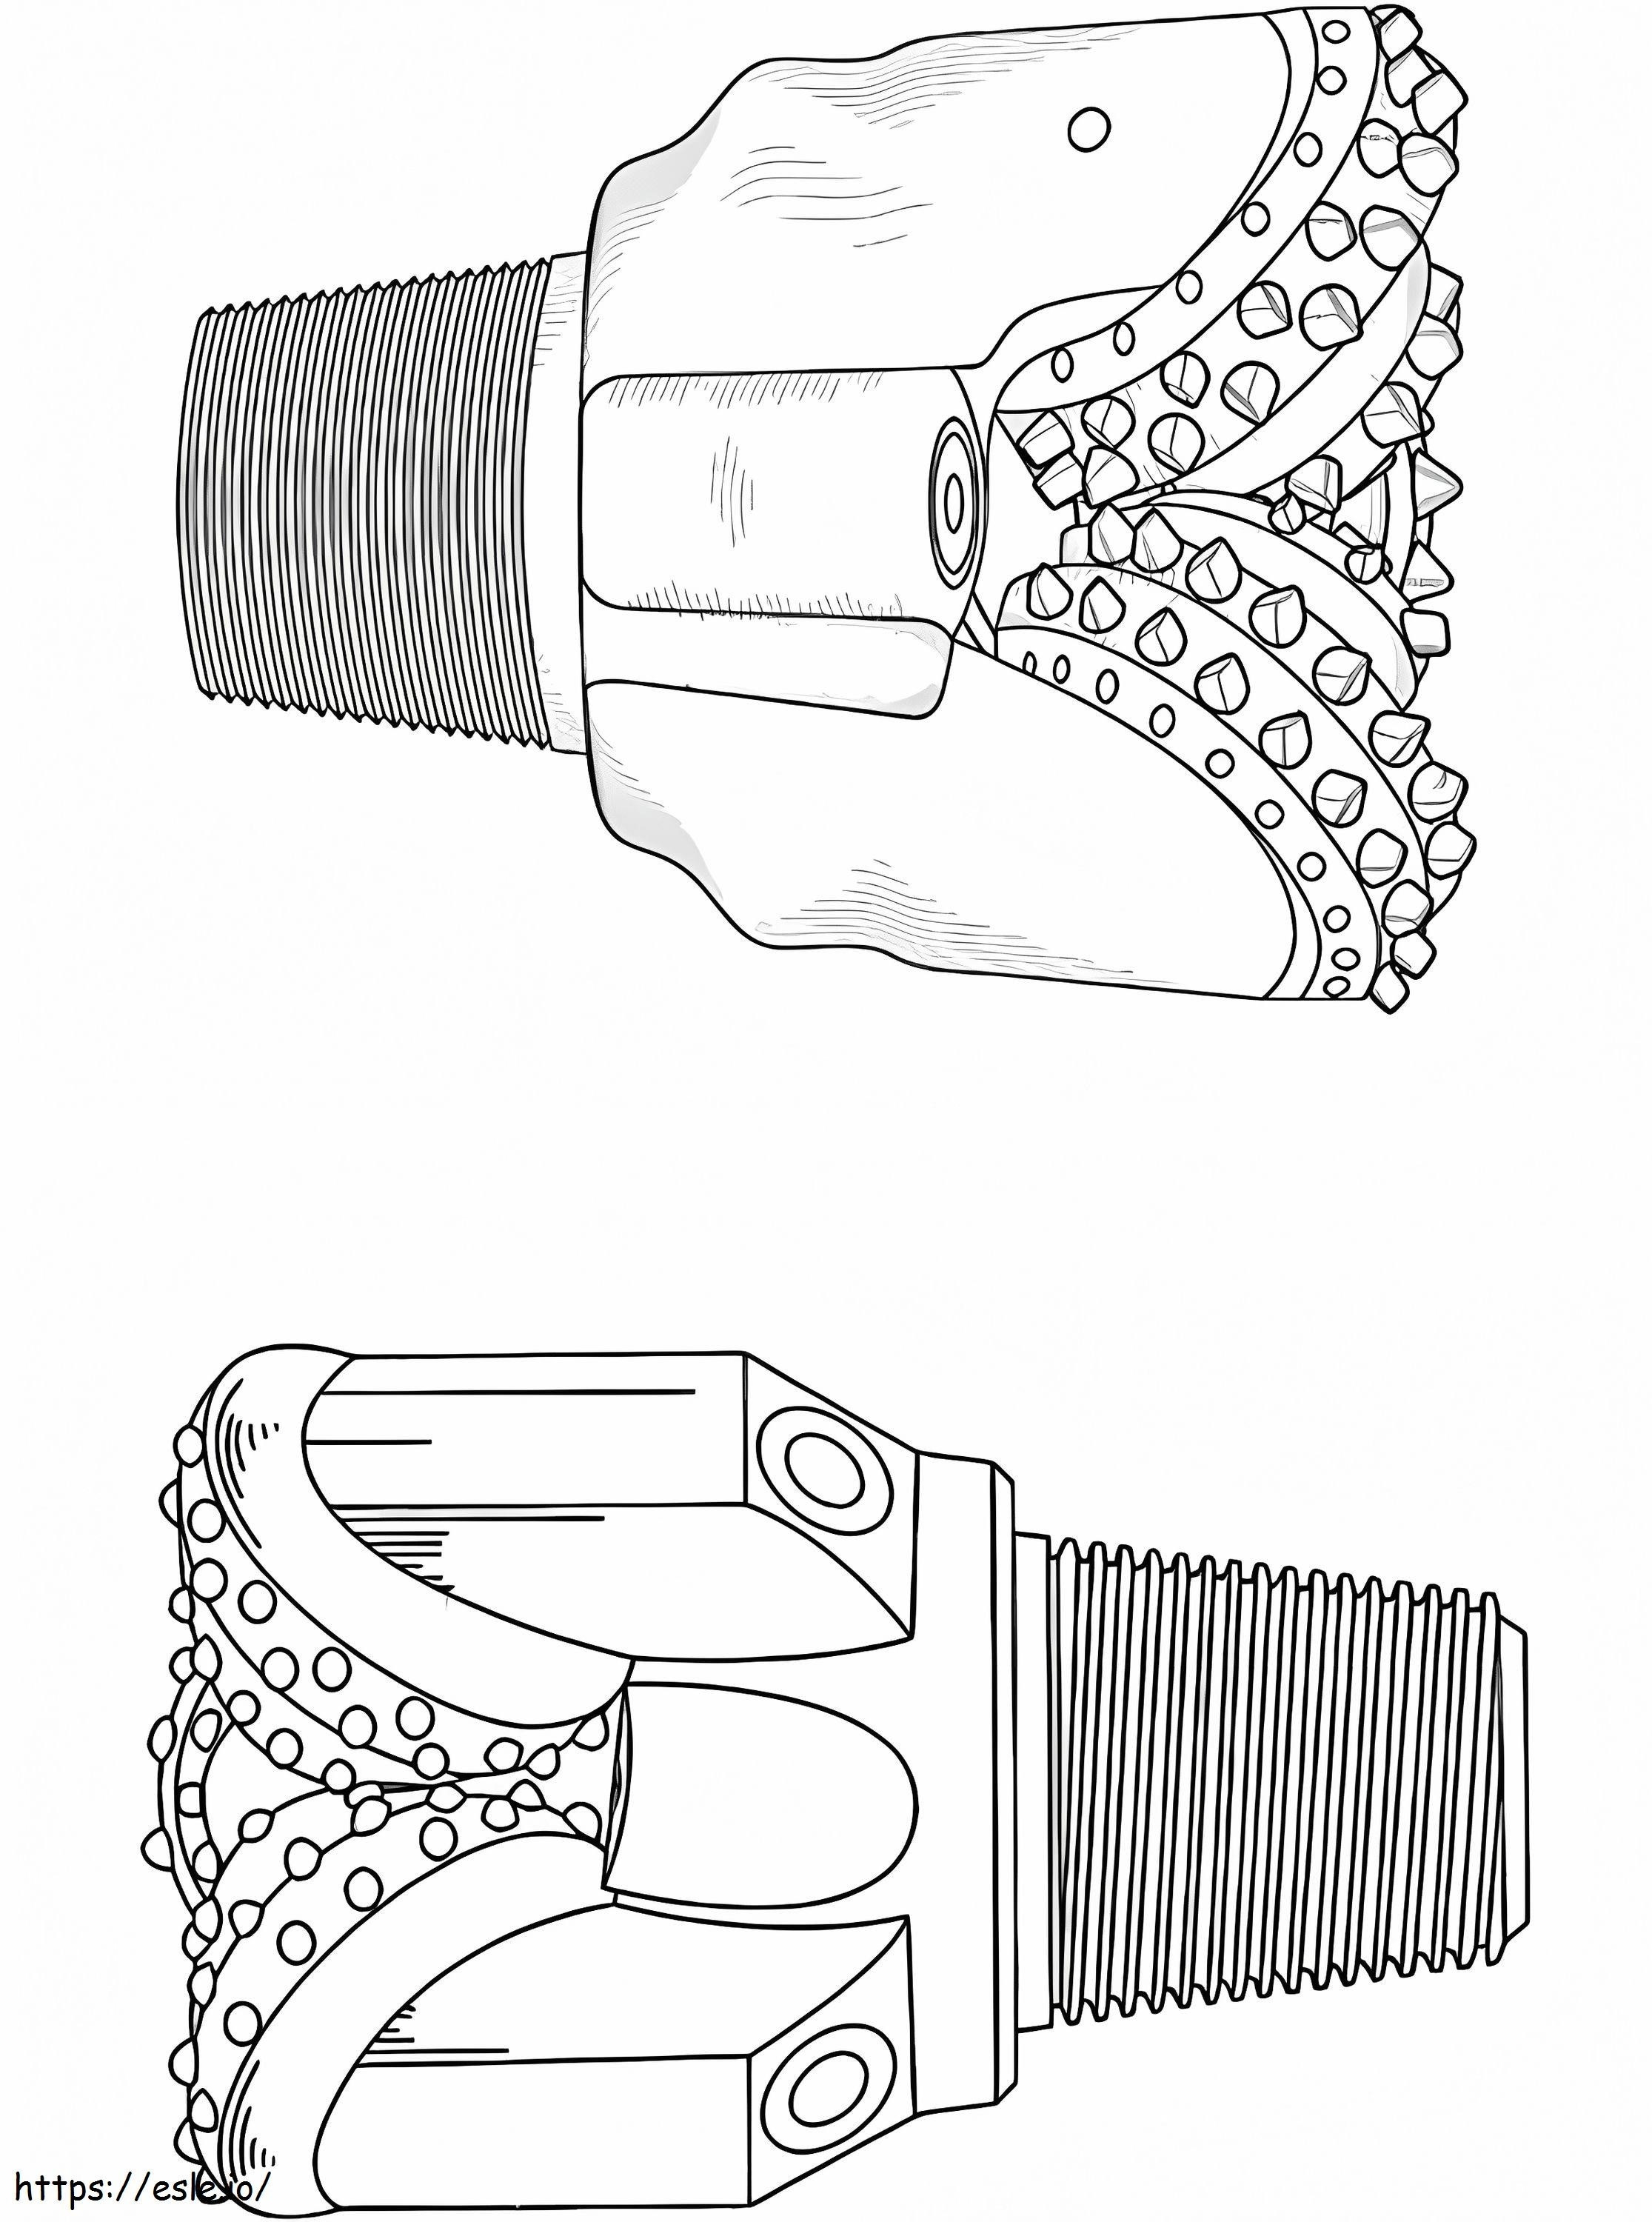 Drill Chuck coloring page